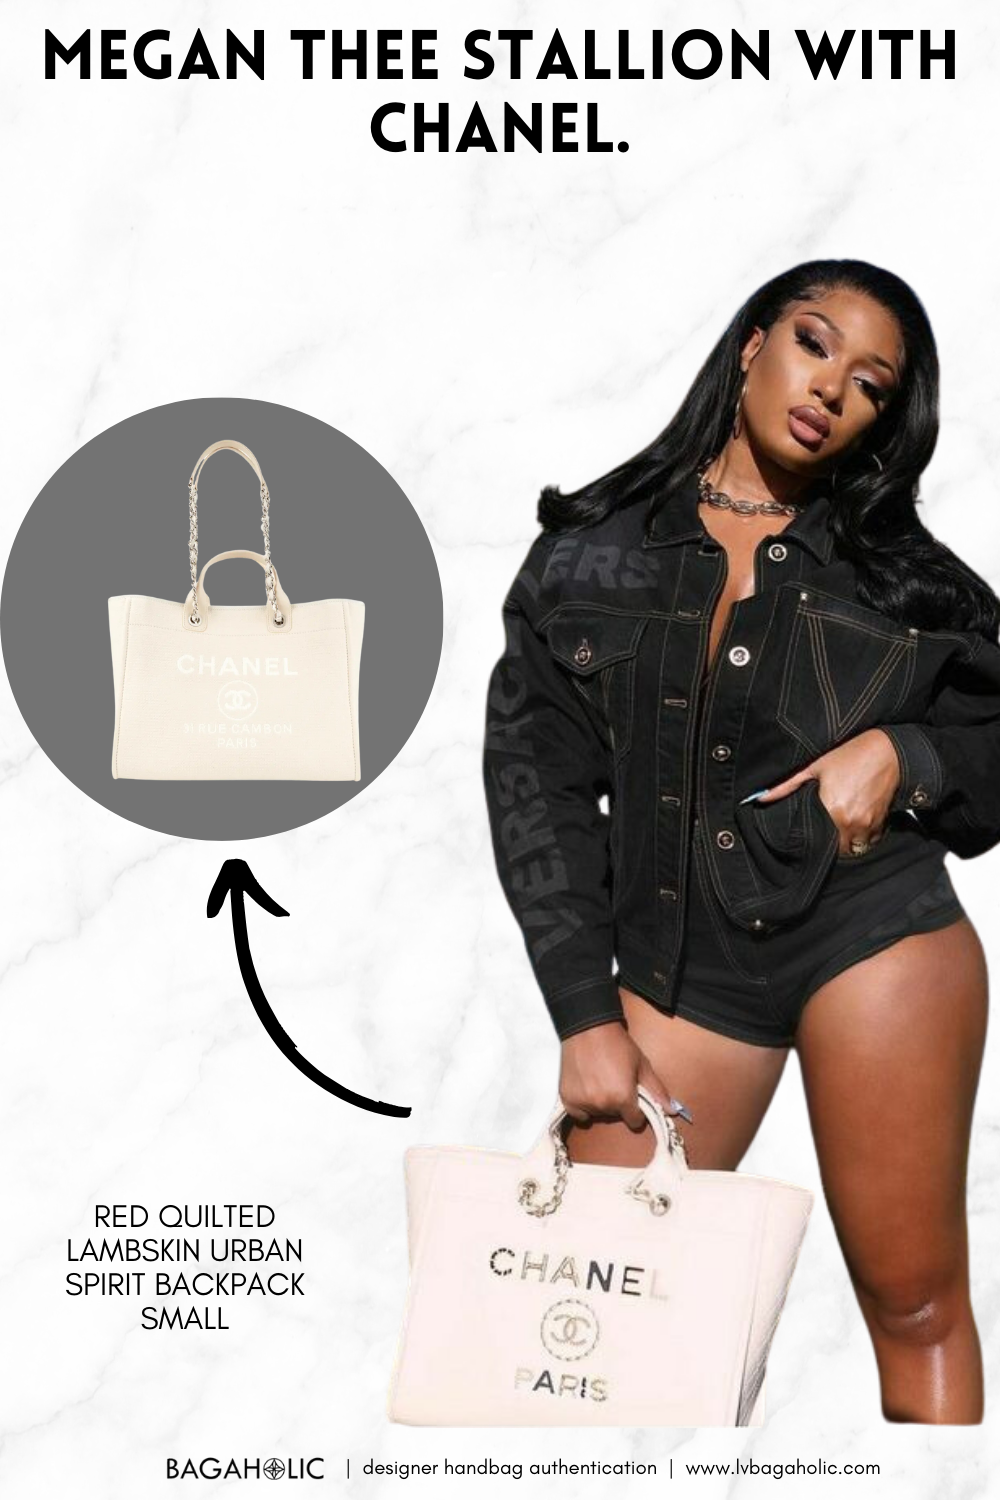 100 Celebs and Their Favorite Chanel Bags (Part 1) Megan Thee Stallion WITH CHANEL